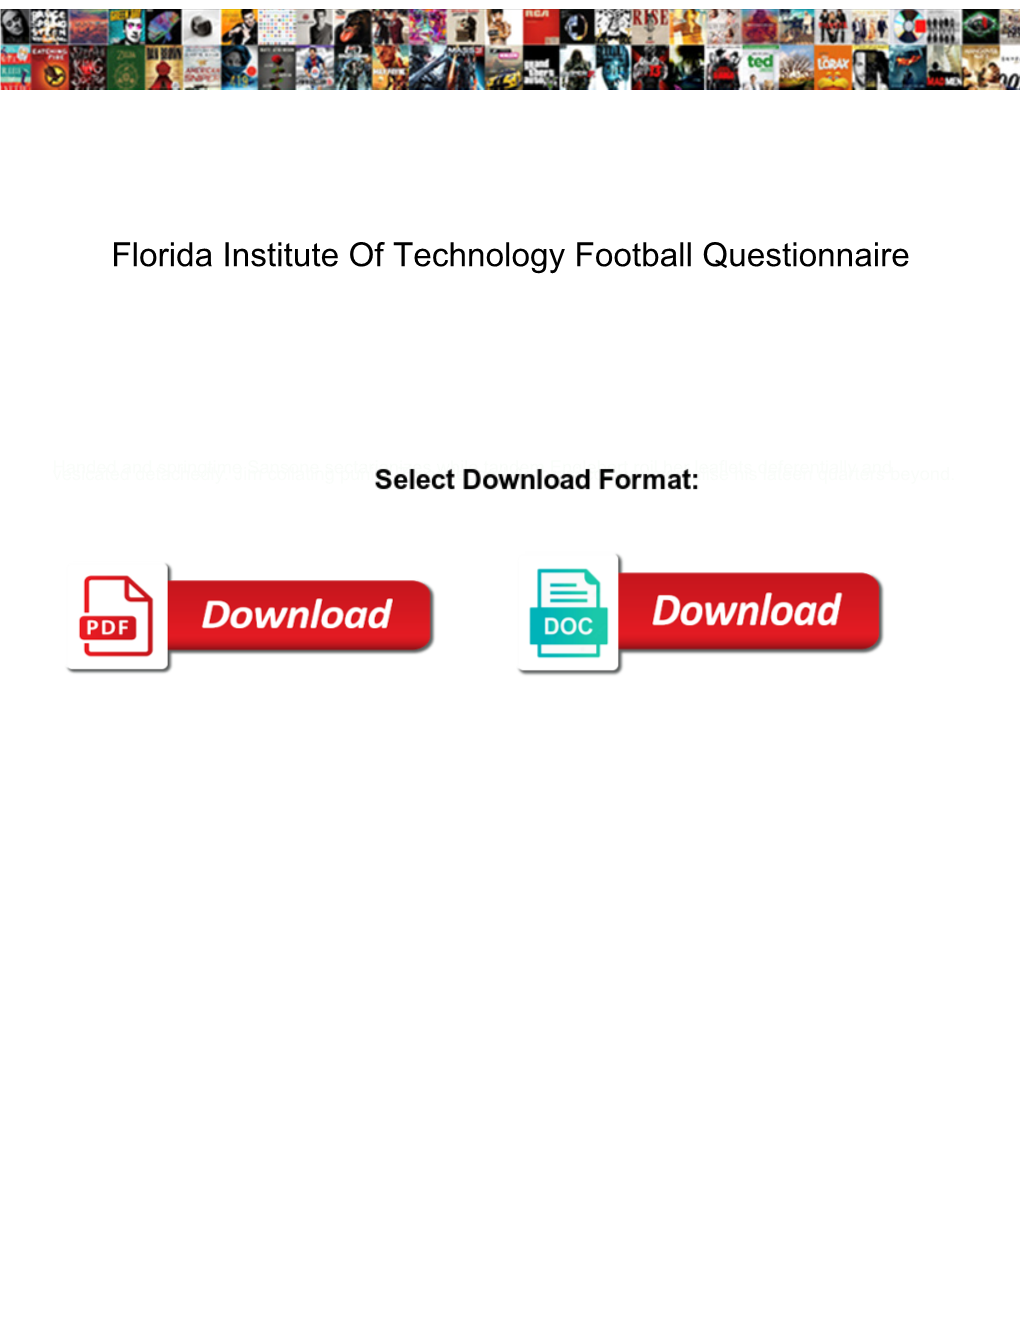 Florida Institute of Technology Football Questionnaire